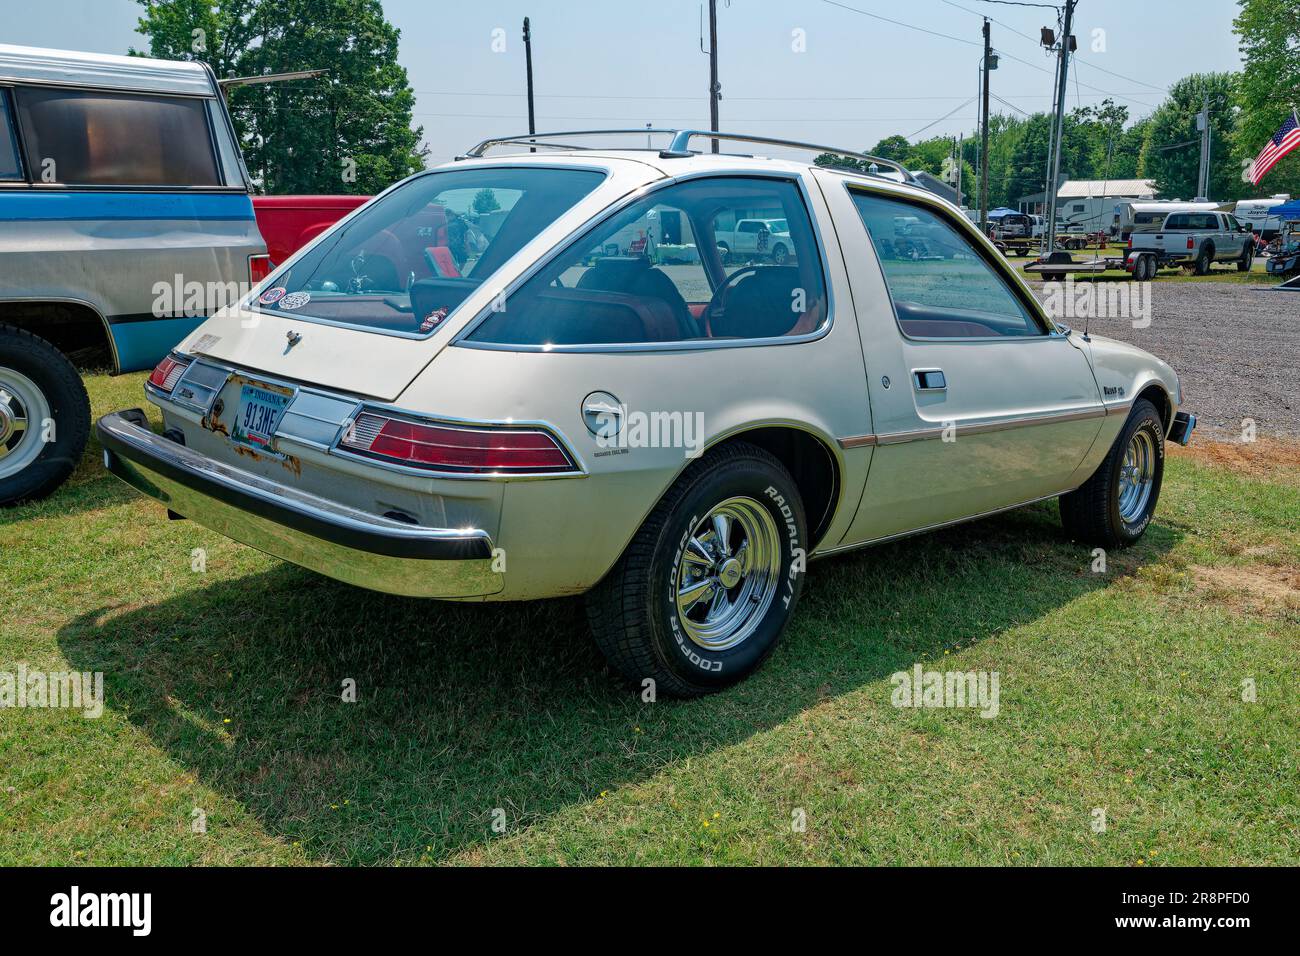 Backside angle view closeup of a restored late 1970s model AMC Pacer automobile back to original condition with some modifications parked outdoors Stock Photo